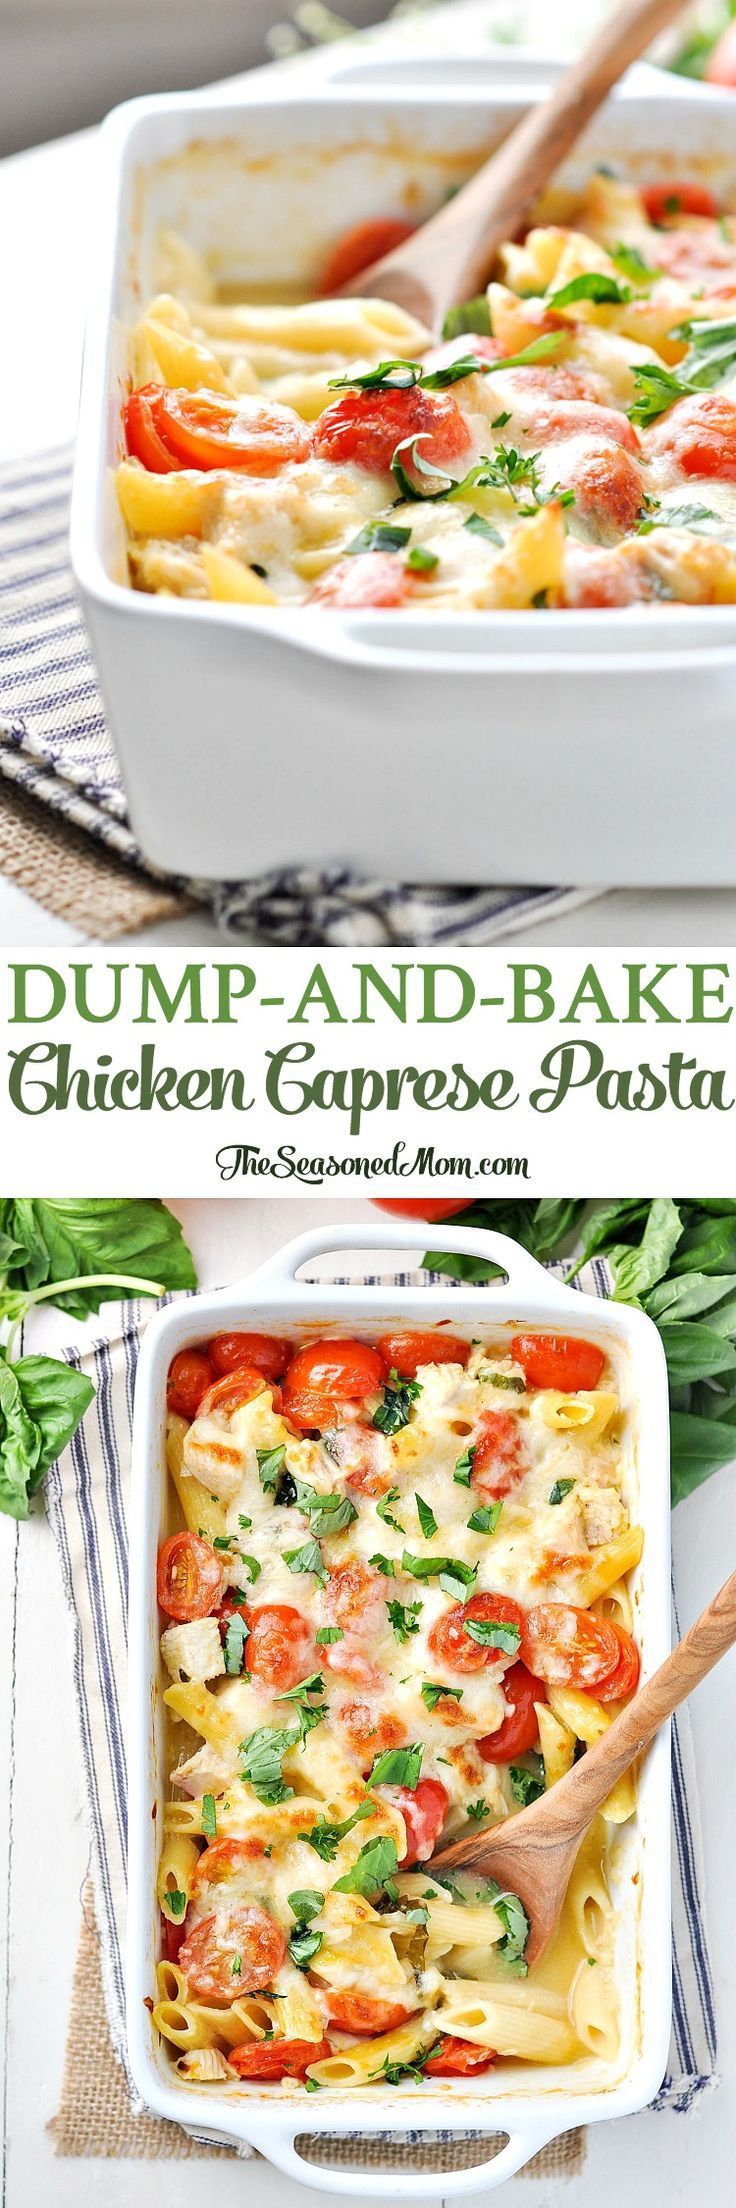 Dump-and-Bake Chicken Caprese Pasta! Easy Dinner Healthy Recipes|Easy | GF Pasta for me, of course|